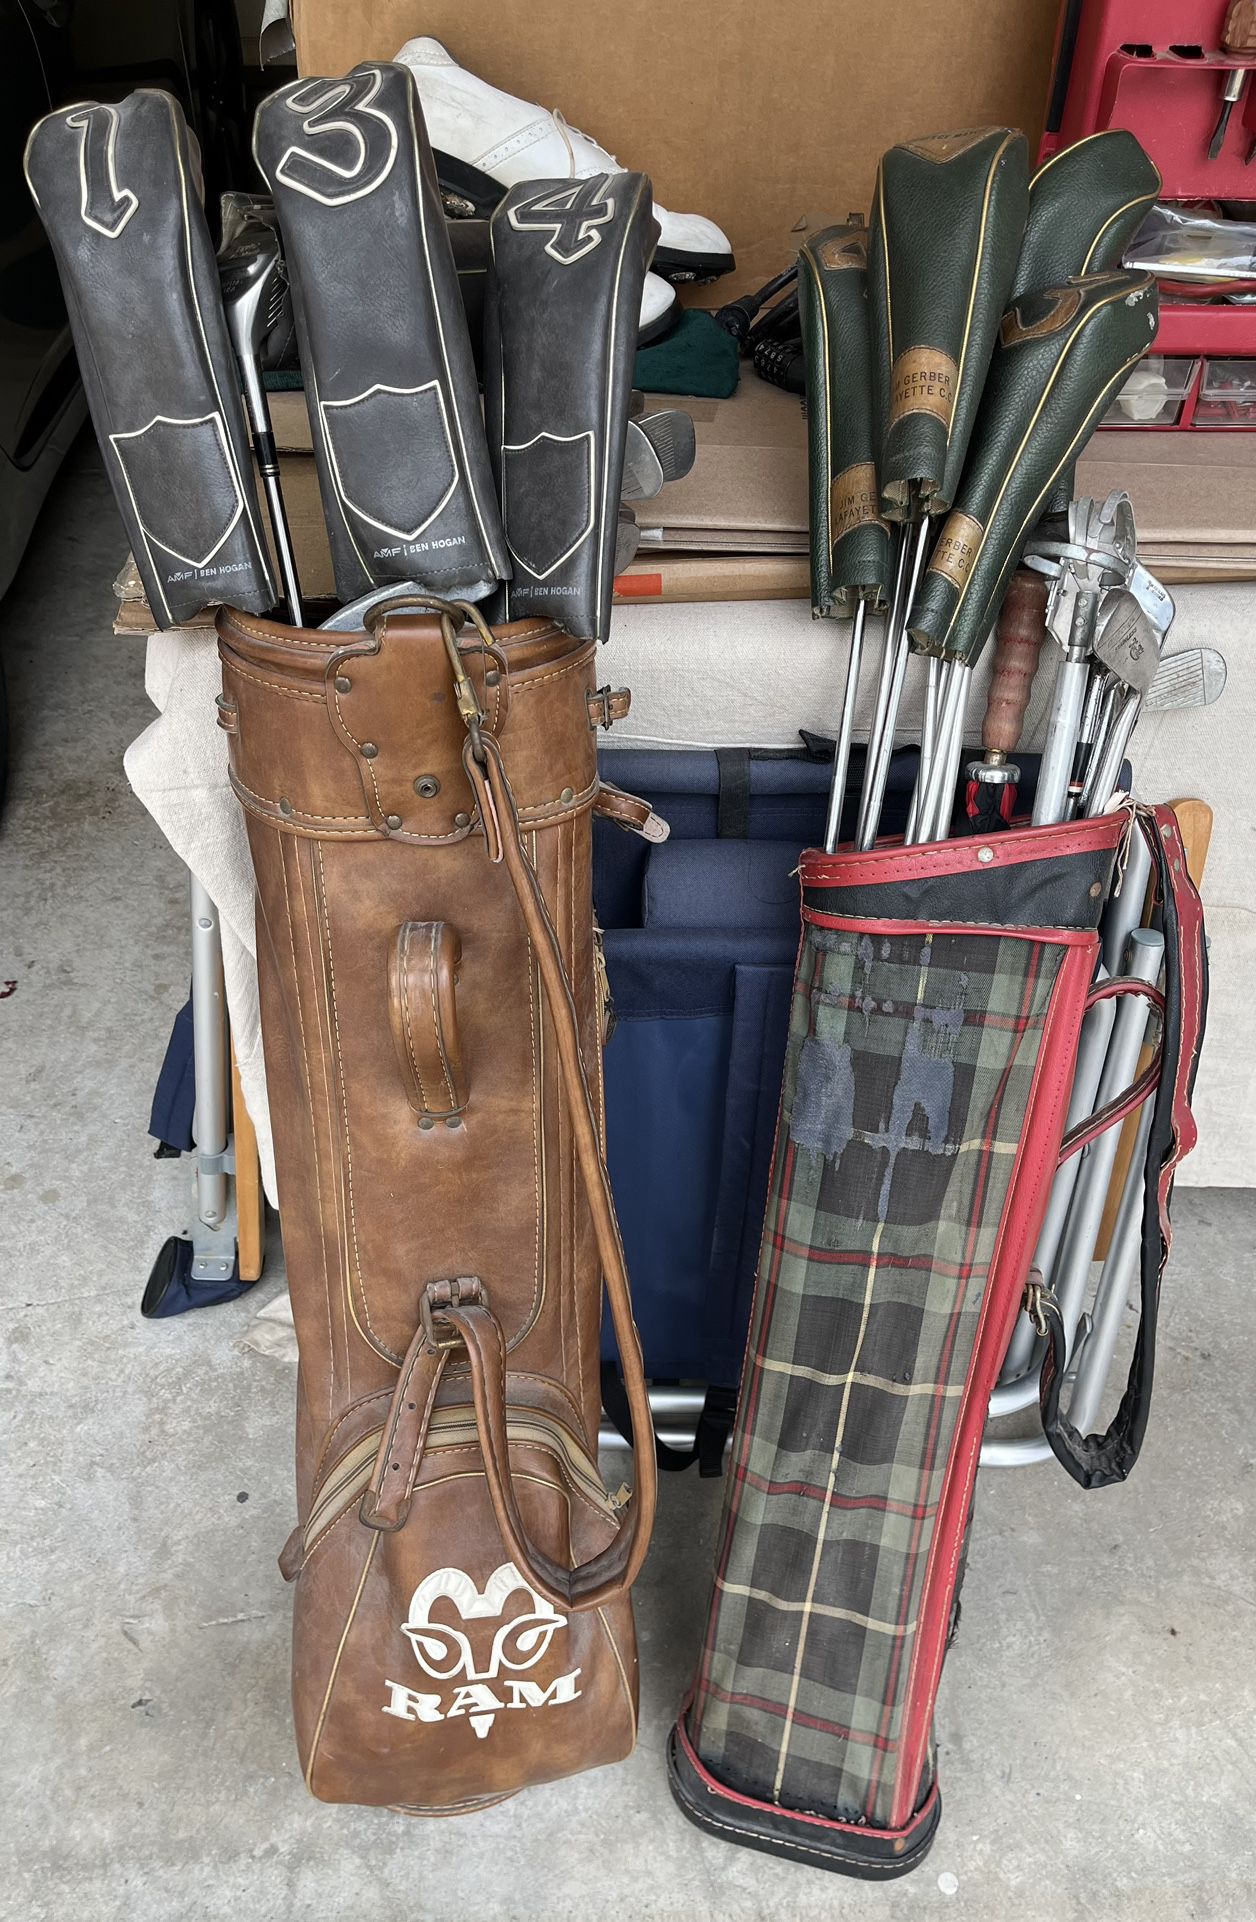 2 Sets Of Vintage Golf Clubs - Taylormade Drivers & liberty Irons